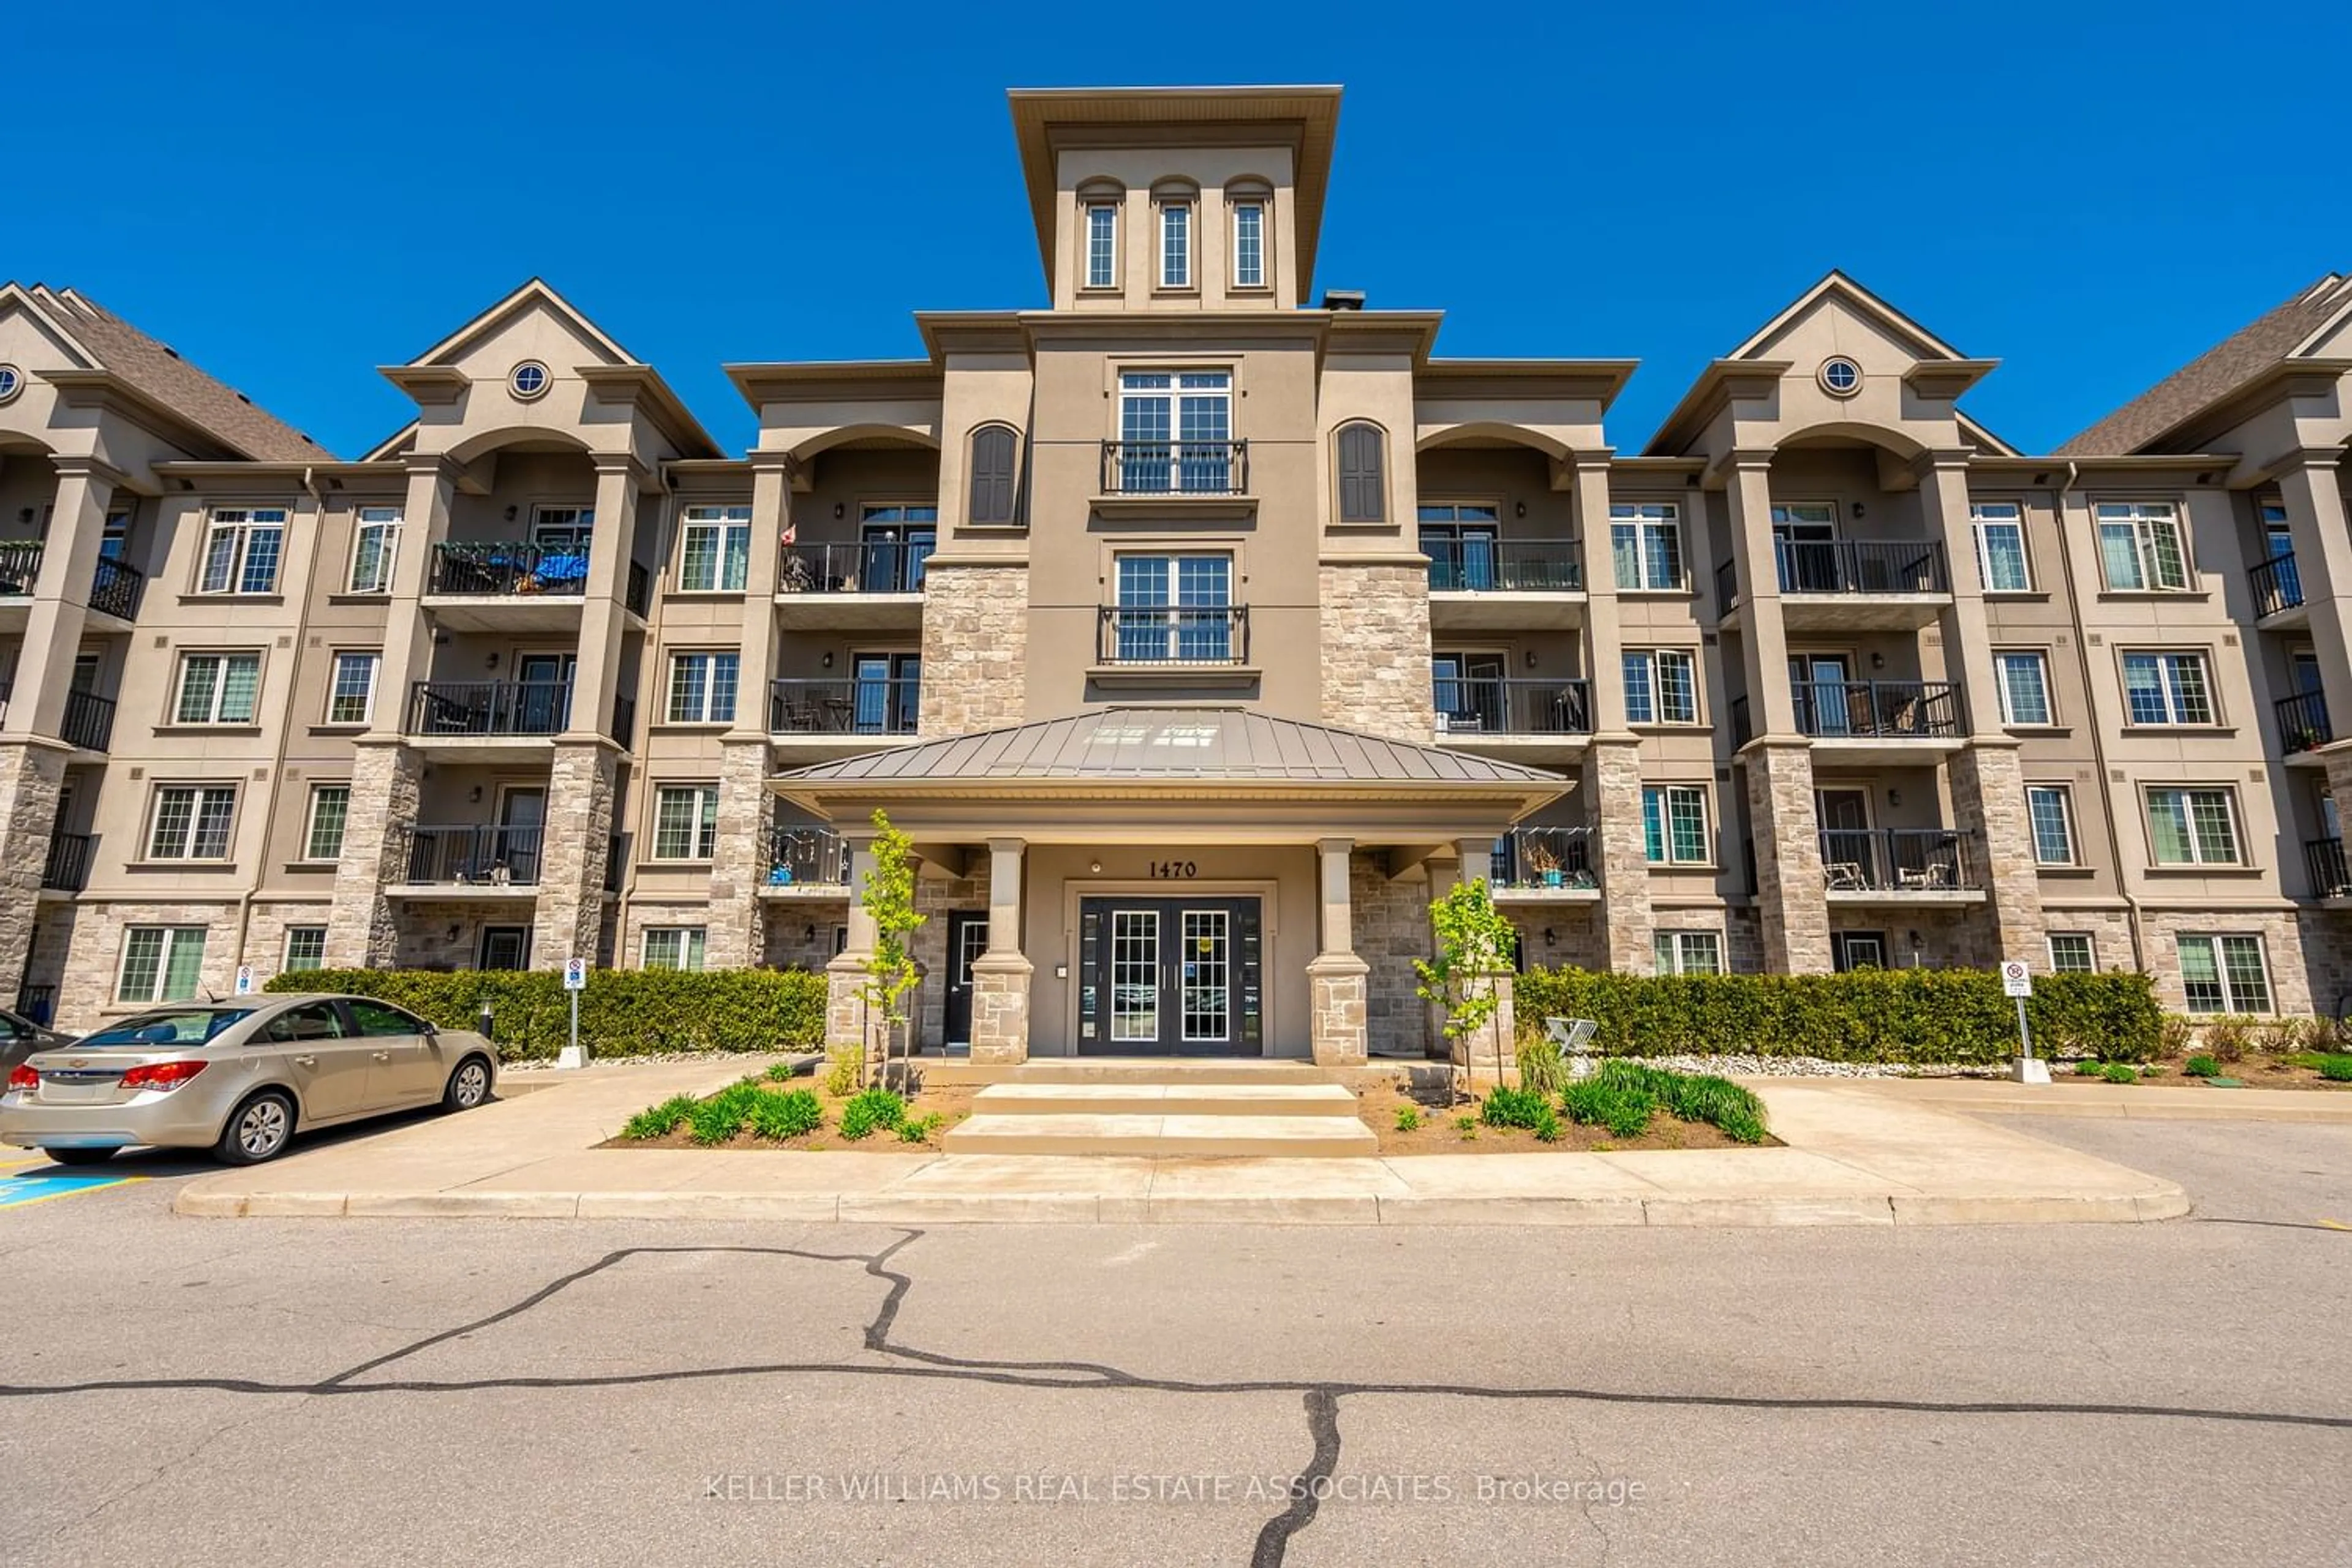 A pic from exterior of the house or condo for 1470 Main St #314, Milton Ontario L9T 8W6